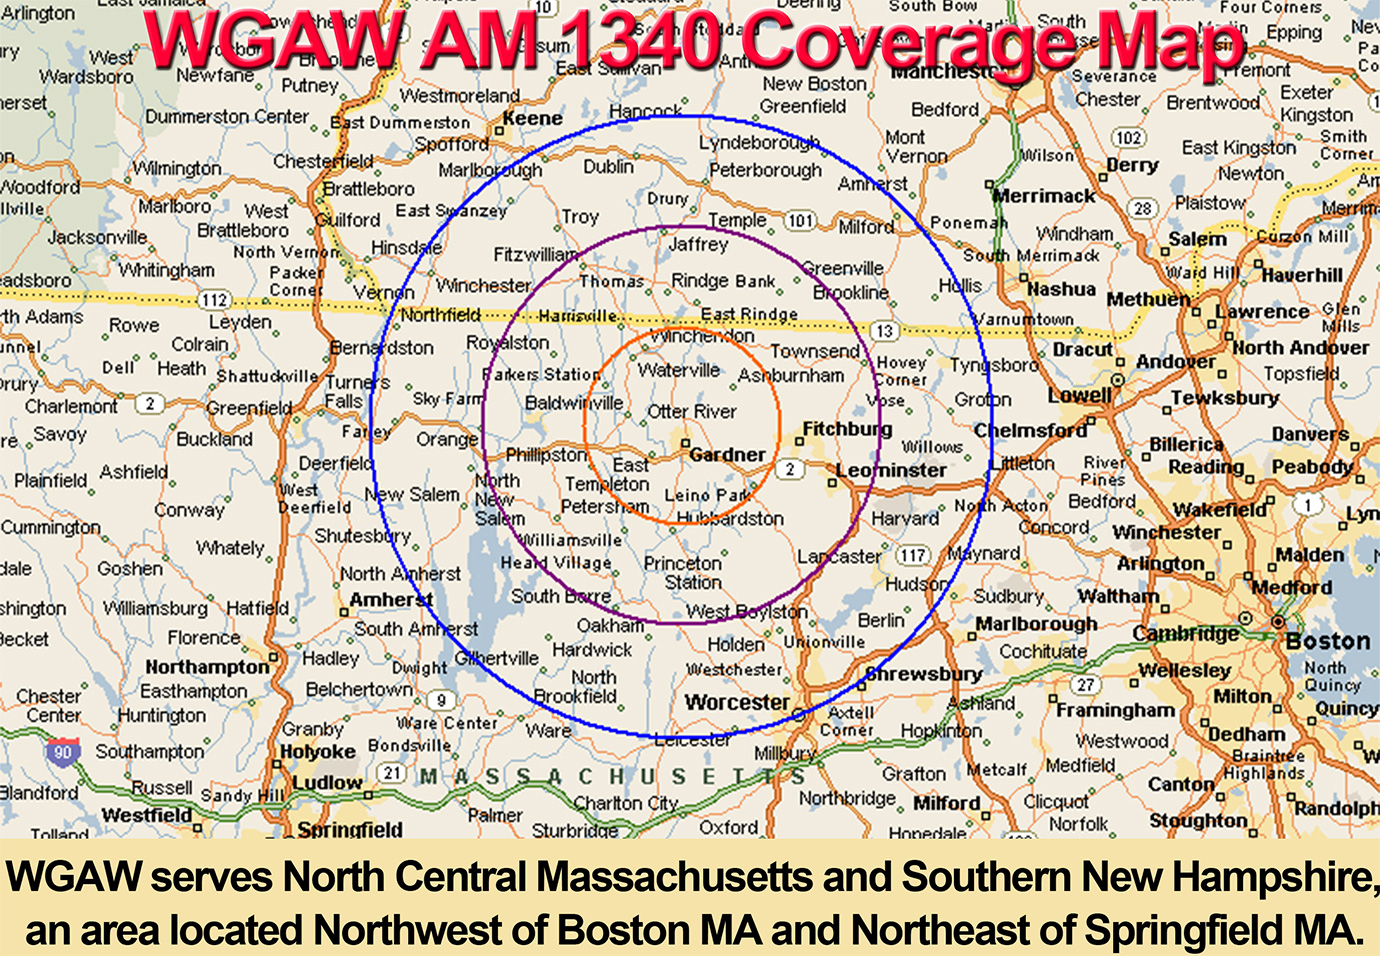 WGAW Coverage Map zoomed out